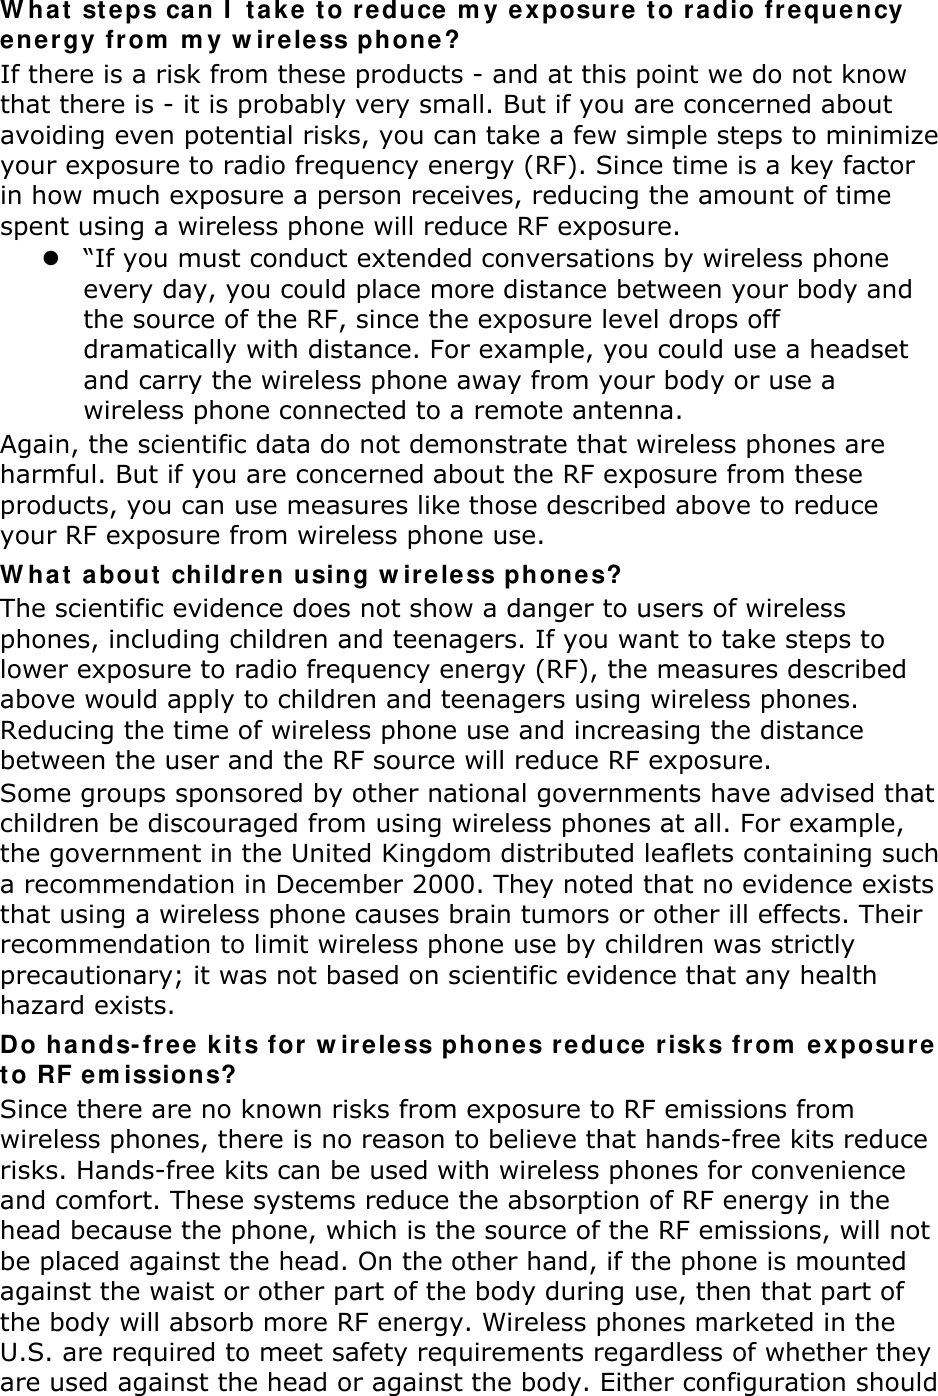 W hat st eps can I  tak e to reduce m y ex posure t o ra dio fr equ ency en ergy fr om  m y w ir eless phone? If there is a risk from these products - and at this point we do not know that there is - it is probably very small. But if you are concerned about avoiding even potential risks, you can take a few simple steps to minimize your exposure to radio frequency energy (RF). Since time is a key factor in how much exposure a person receives, reducing the amount of time spent using a wireless phone will reduce RF exposure. z “If you must conduct extended conversations by wireless phone every day, you could place more distance between your body and the source of the RF, since the exposure level drops off dramatically with distance. For example, you could use a headset and carry the wireless phone away from your body or use a wireless phone connected to a remote antenna. Again, the scientific data do not demonstrate that wireless phones are harmful. But if you are concerned about the RF exposure from these products, you can use measures like those described above to reduce your RF exposure from wireless phone use. W hat about  childr en usin g w ireless phone s? The scientific evidence does not show a danger to users of wireless phones, including children and teenagers. If you want to take steps to lower exposure to radio frequency energy (RF), the measures described above would apply to children and teenagers using wireless phones. Reducing the time of wireless phone use and increasing the distance between the user and the RF source will reduce RF exposure. Some groups sponsored by other national governments have advised that children be discouraged from using wireless phones at all. For example, the government in the United Kingdom distributed leaflets containing such a recommendation in December 2000. They noted that no evidence exists that using a wireless phone causes brain tumors or other ill effects. Their recommendation to limit wireless phone use by children was strictly precautionary; it was not based on scientific evidence that any health hazard exists.   Do hands- fr ee  kits for w ireless ph one s r educe r isk s from  e xposure t o RF em issions? Since there are no known risks from exposure to RF emissions from wireless phones, there is no reason to believe that hands-free kits reduce risks. Hands-free kits can be used with wireless phones for convenience and comfort. These systems reduce the absorption of RF energy in the head because the phone, which is the source of the RF emissions, will not be placed against the head. On the other hand, if the phone is mounted against the waist or other part of the body during use, then that part of the body will absorb more RF energy. Wireless phones marketed in the U.S. are required to meet safety requirements regardless of whether they are used against the head or against the body. Either configuration should 